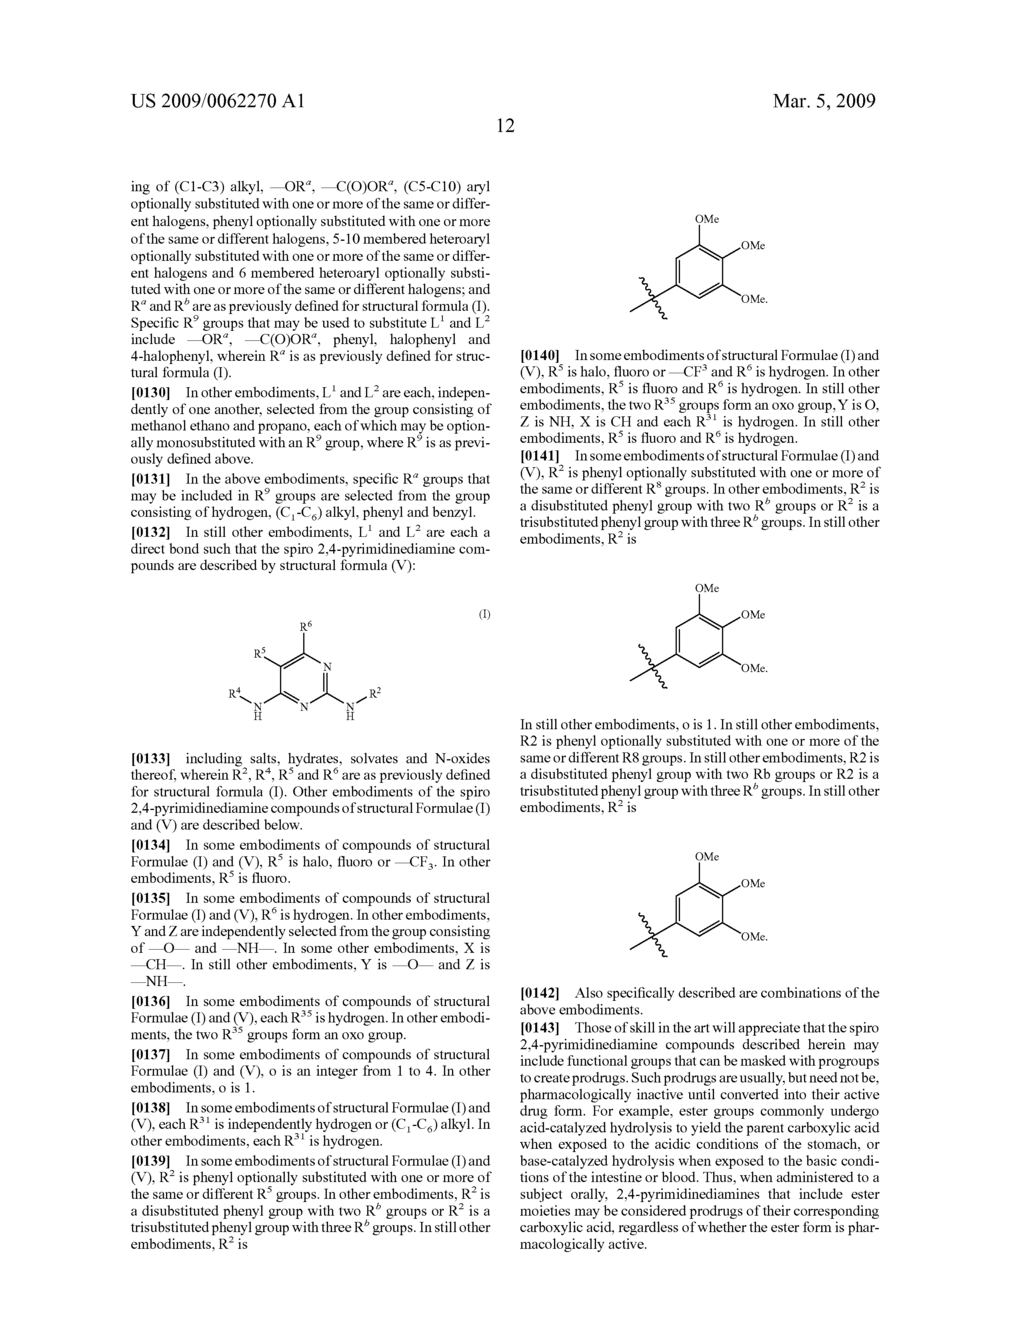 SPIRO 2,4 PYRIMIDINEDIAMINE COMPOUNDS AND THEIR USES - diagram, schematic, and image 16